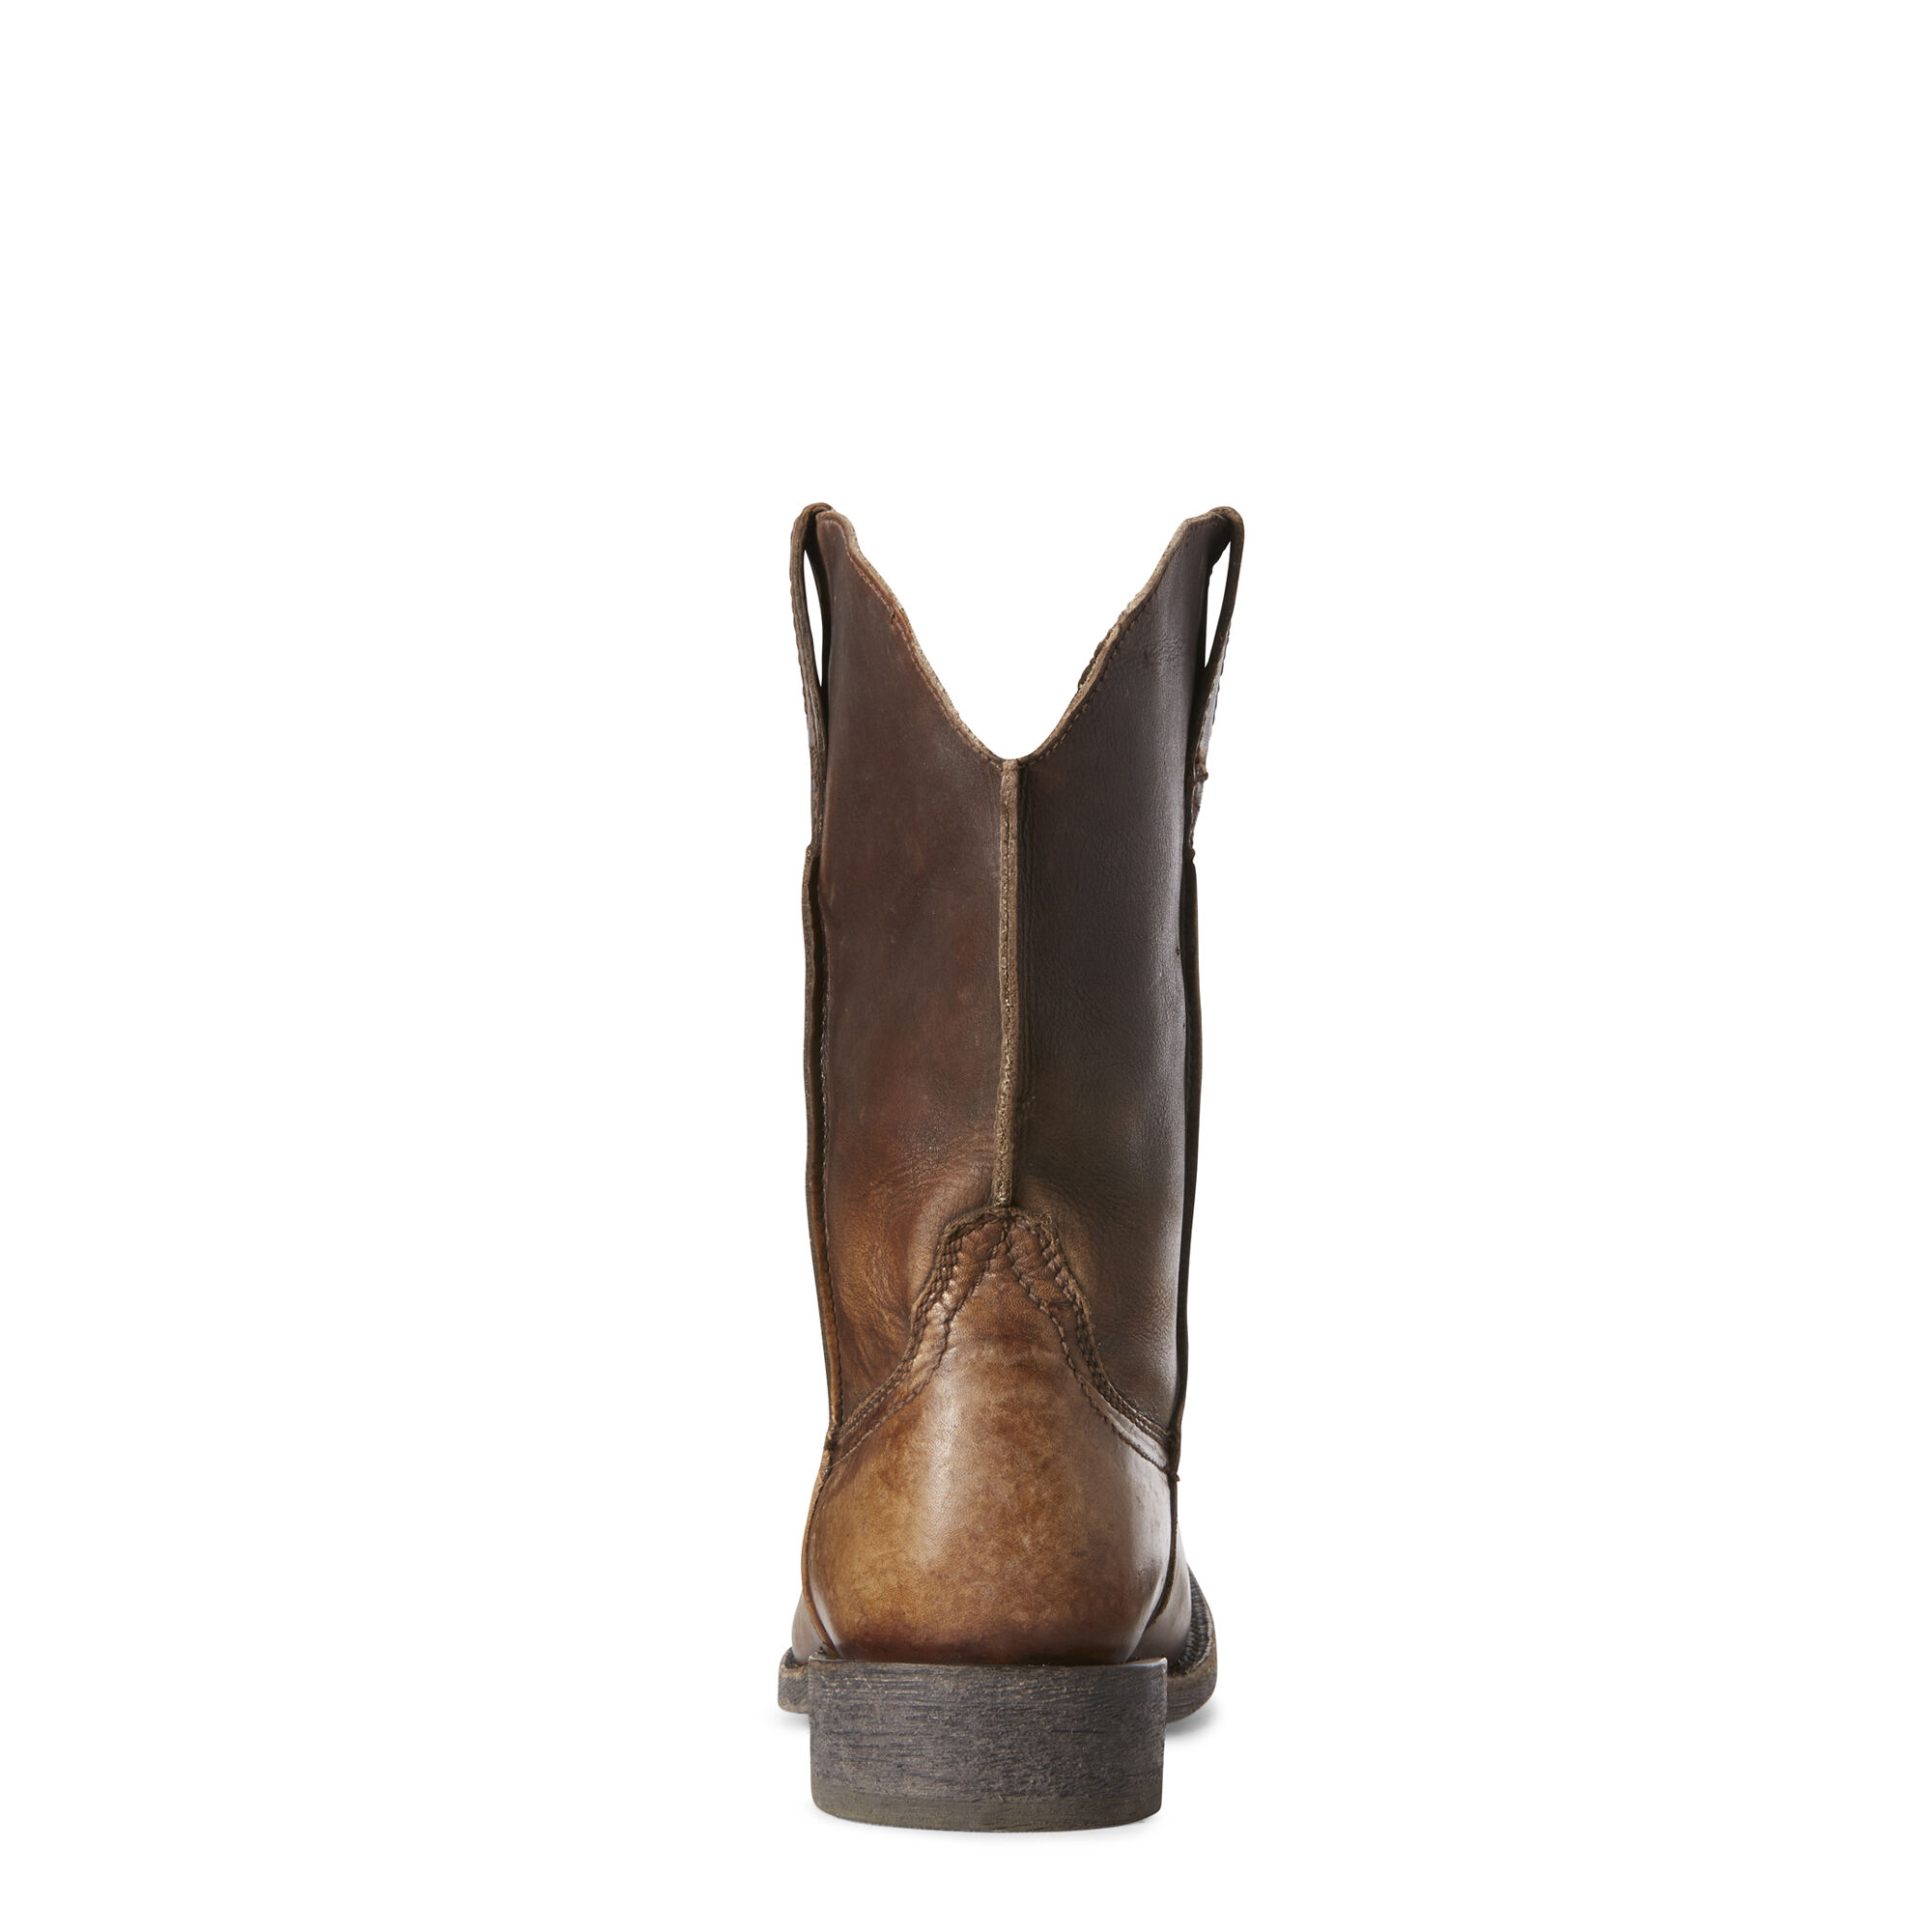 ariat rambler leather sole western boot